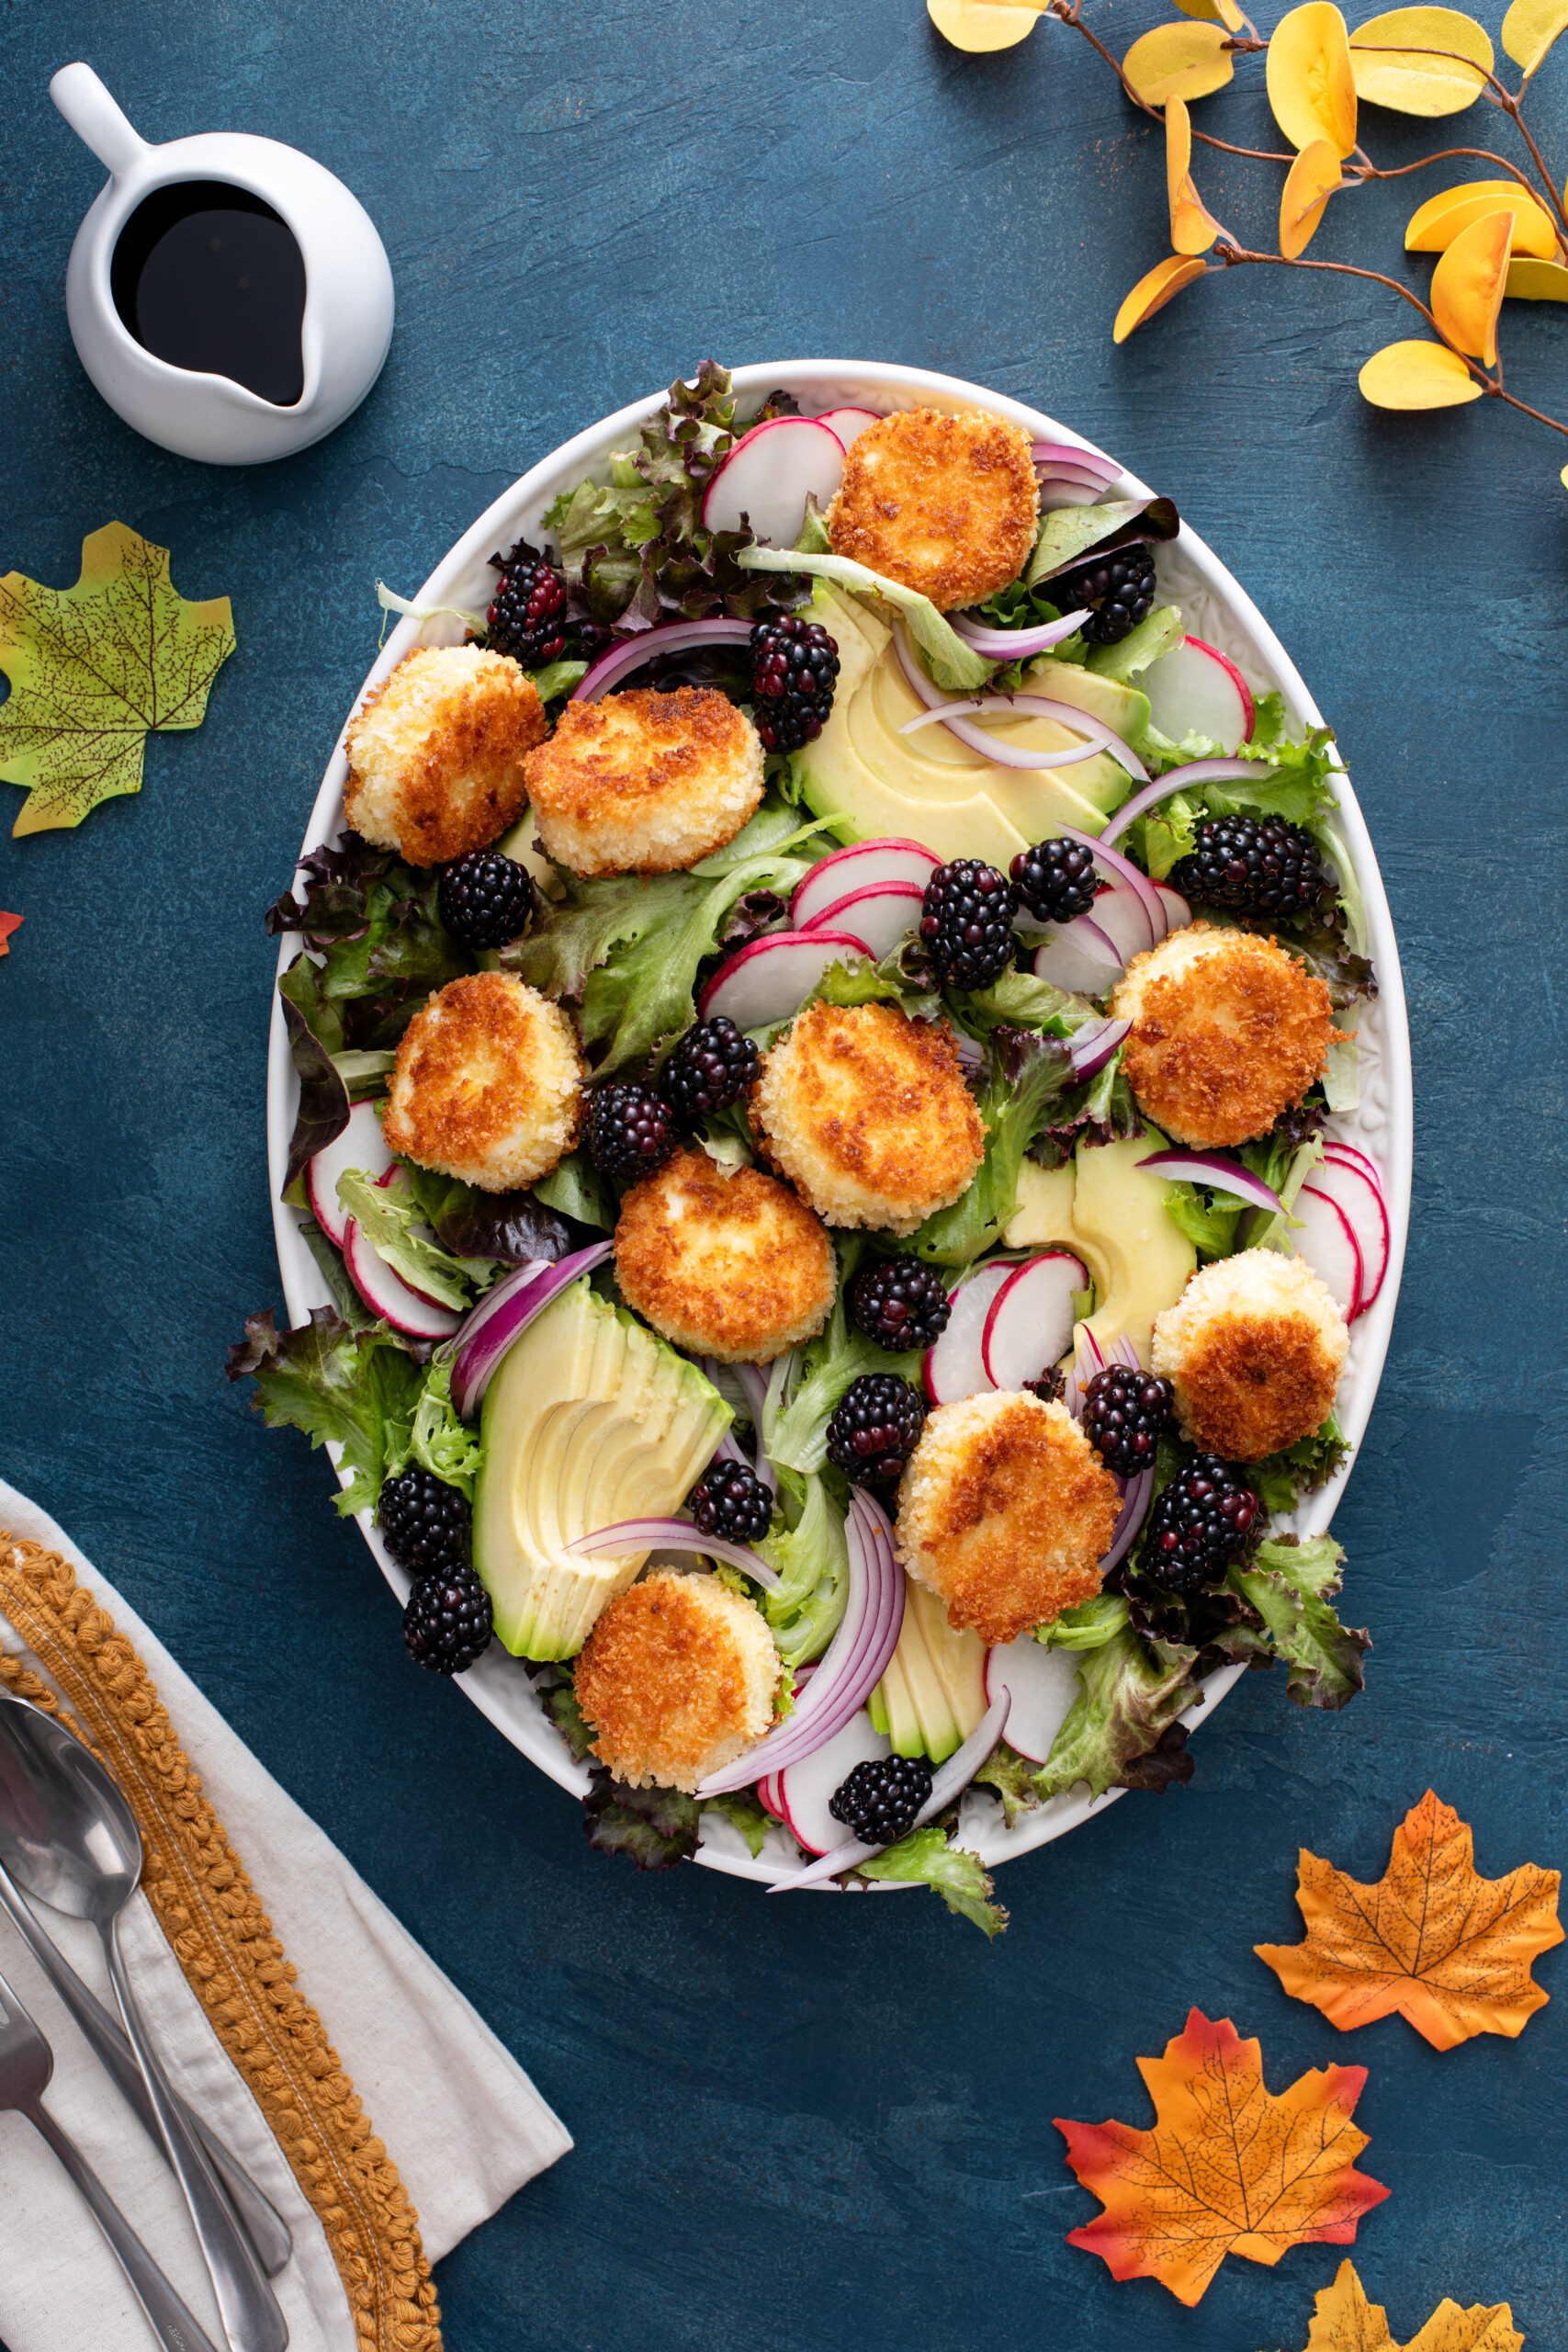 The perfect dinner salad recipe ever. Equal part sweet and savory this blackberry balsamic salad with fried goat cheese balls is to die for. Click here to make it!  